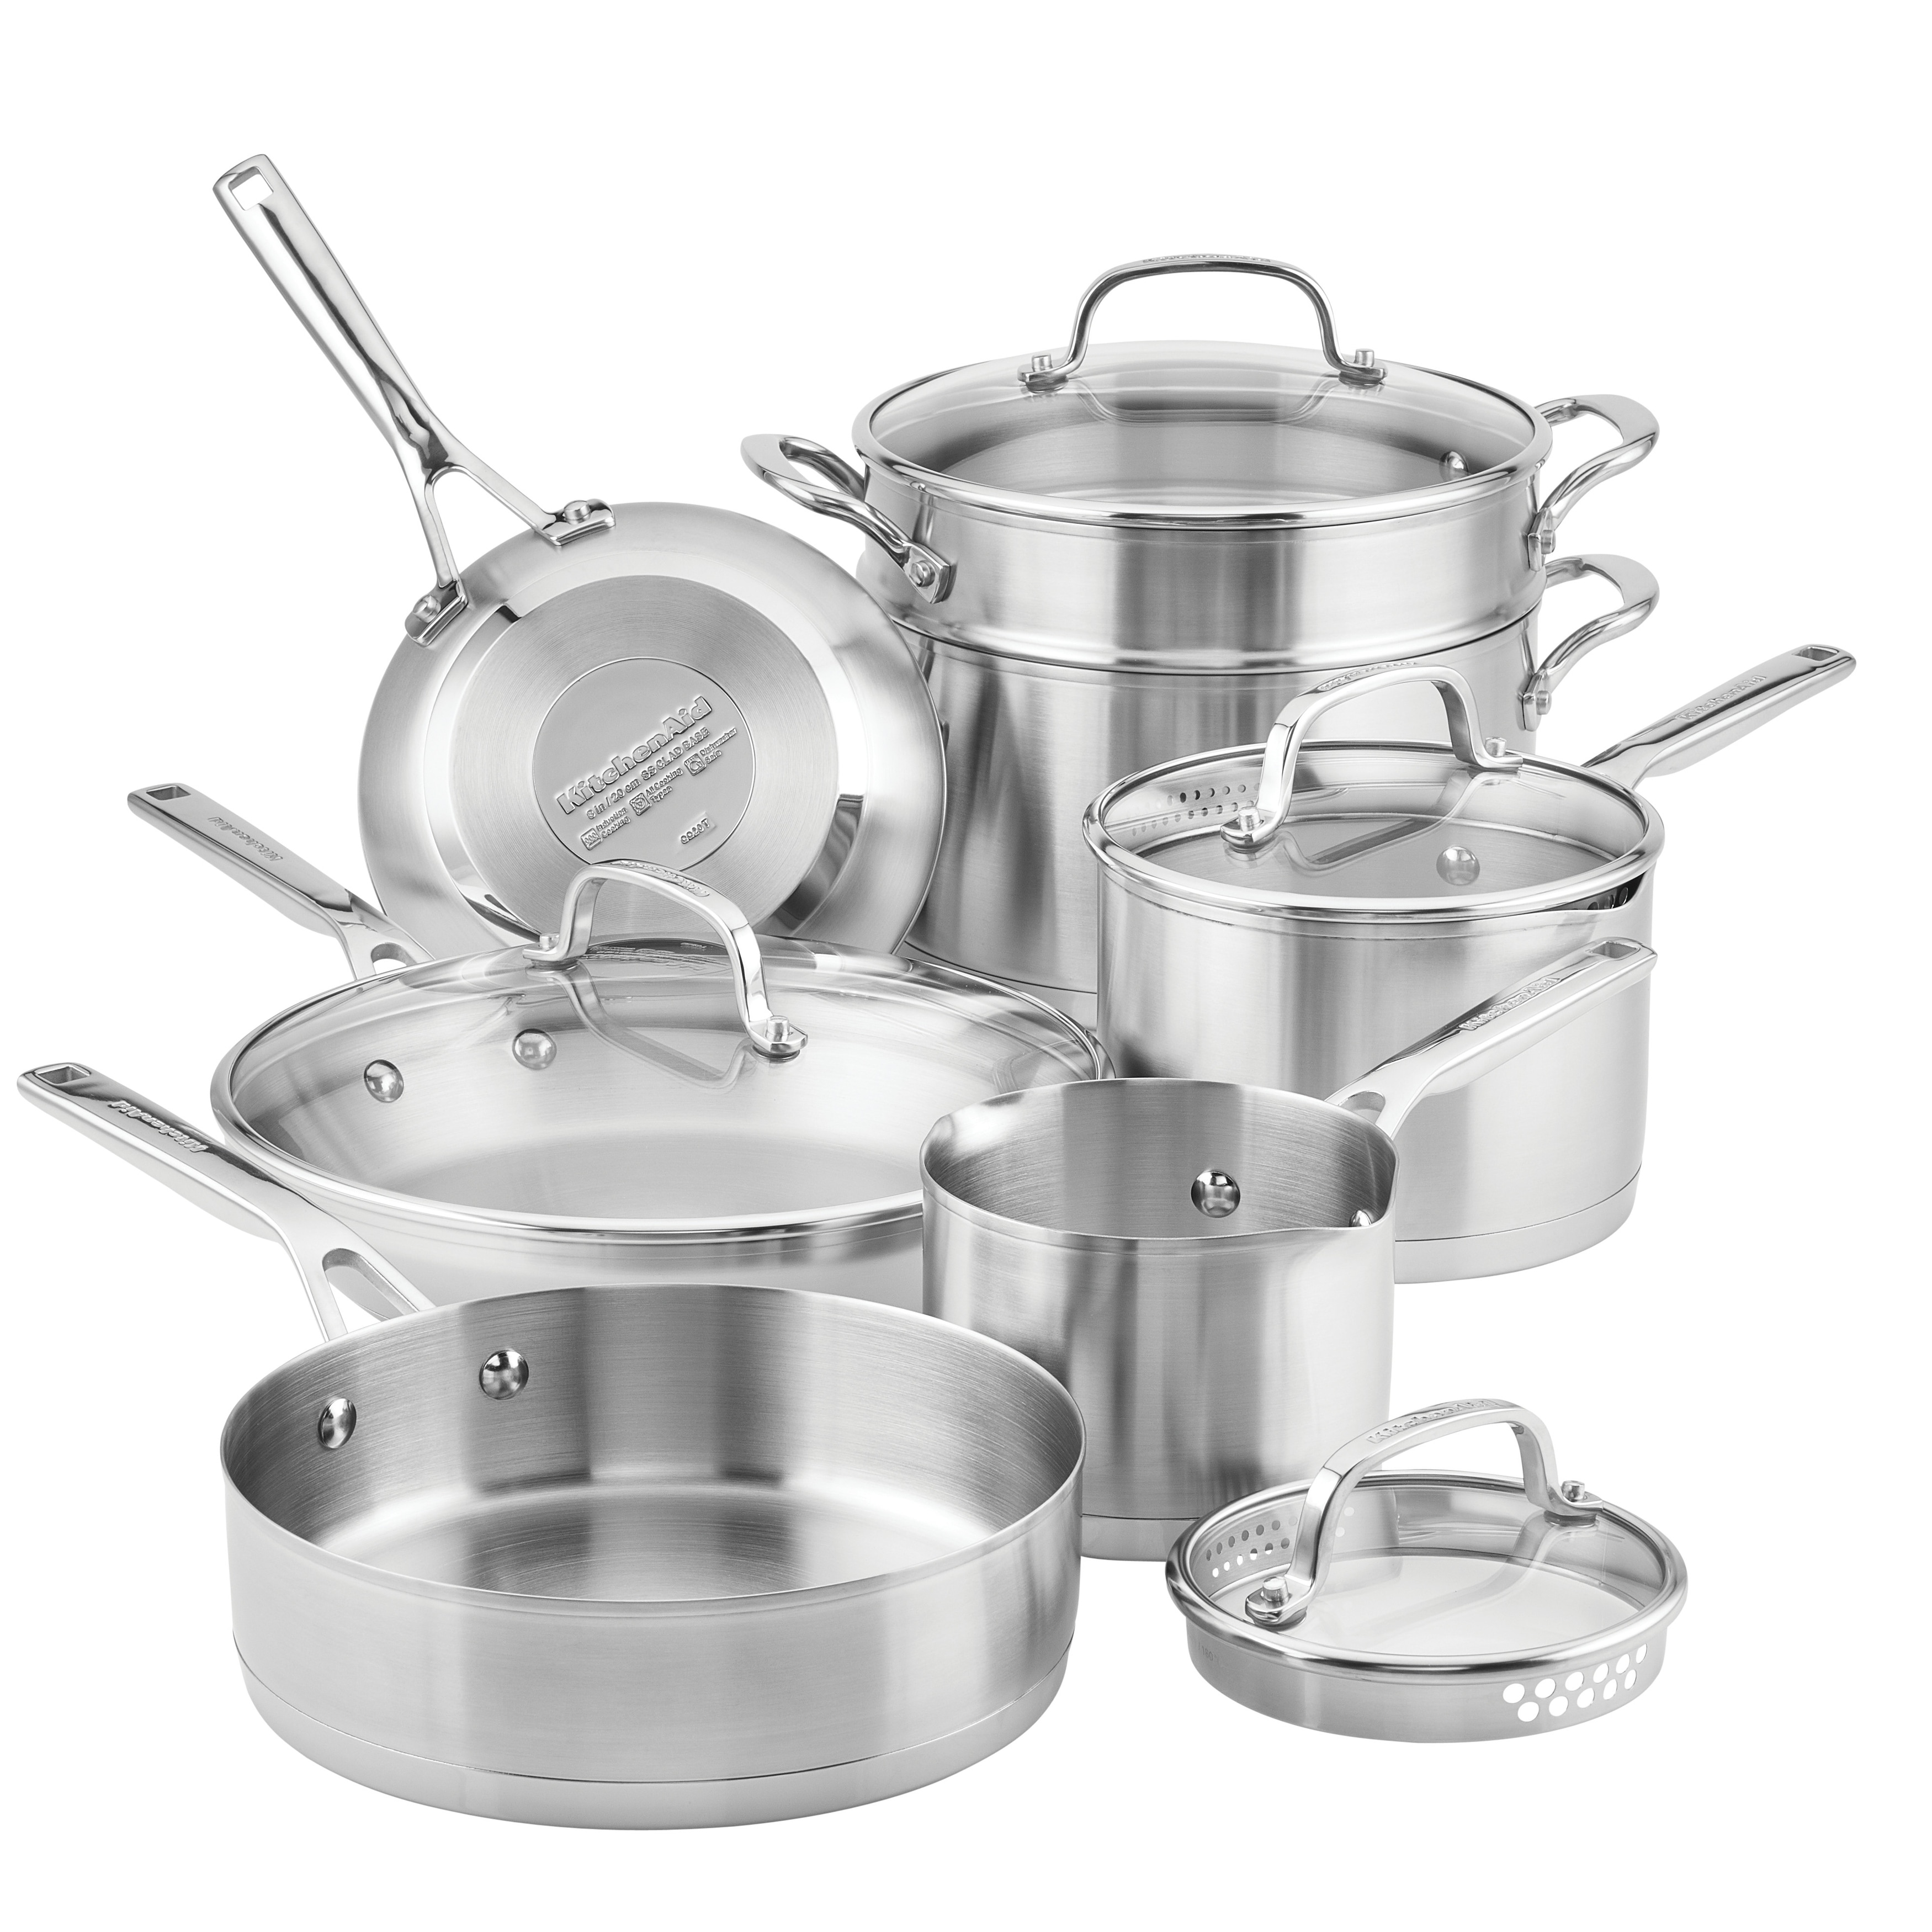 https://ak1.ostkcdn.com/images/products/is/images/direct/4af78636f957460f995bb0f10e54941818679c78/KitchenAid-3-Ply-Base-Stainless-Steel-Cookware-Set%2C-11pc.jpg